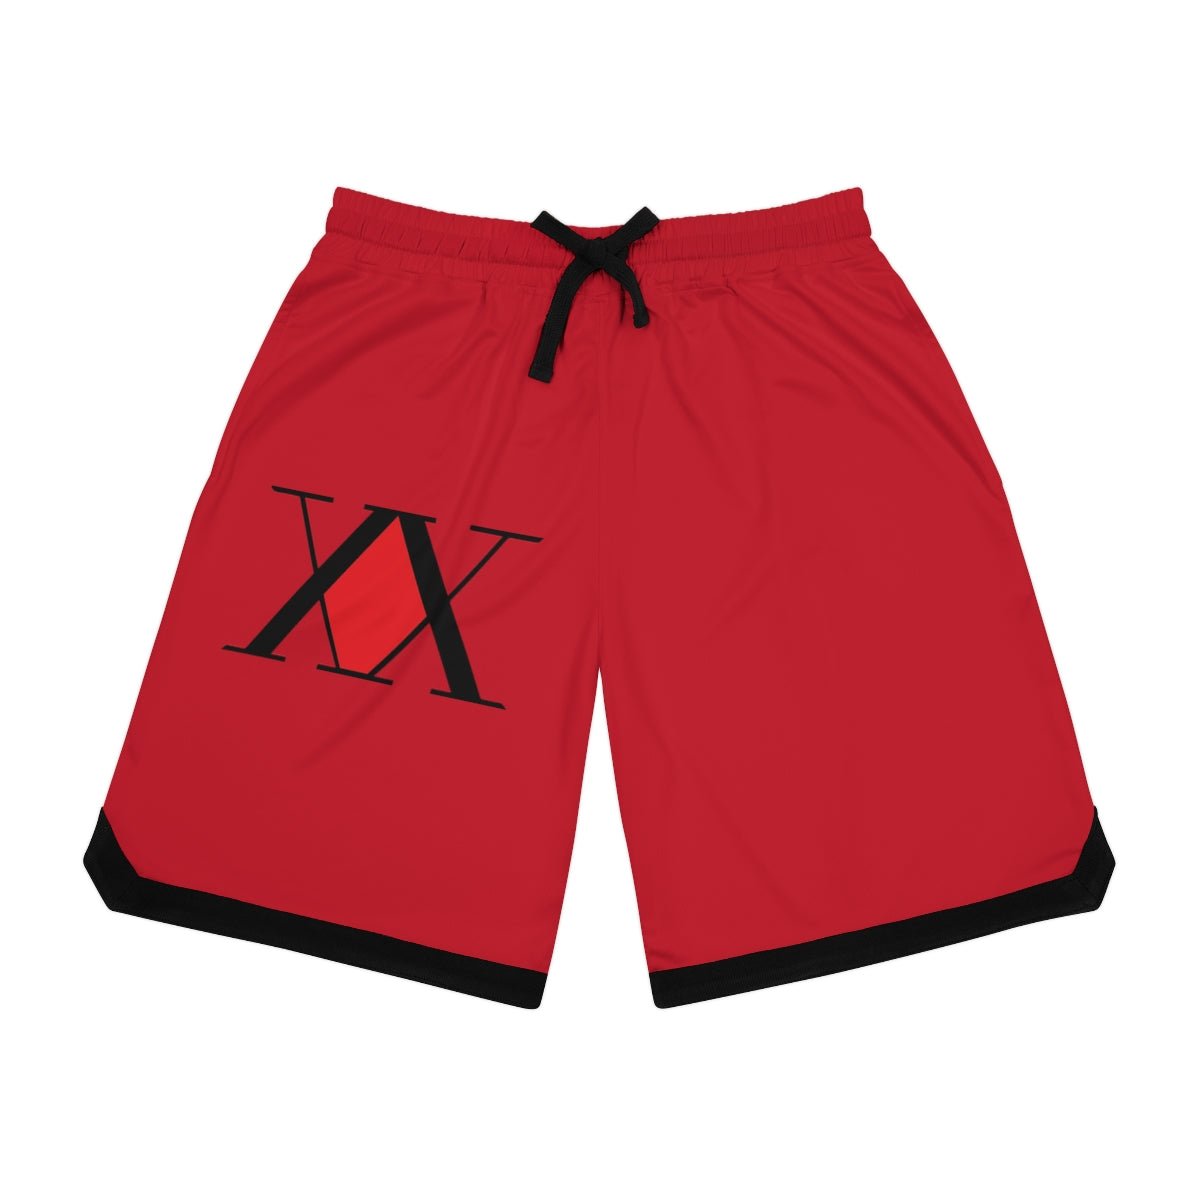 Hunter License Hunter x Hunter Anime Athletic Shorts w/Pockets - One Punch Fits